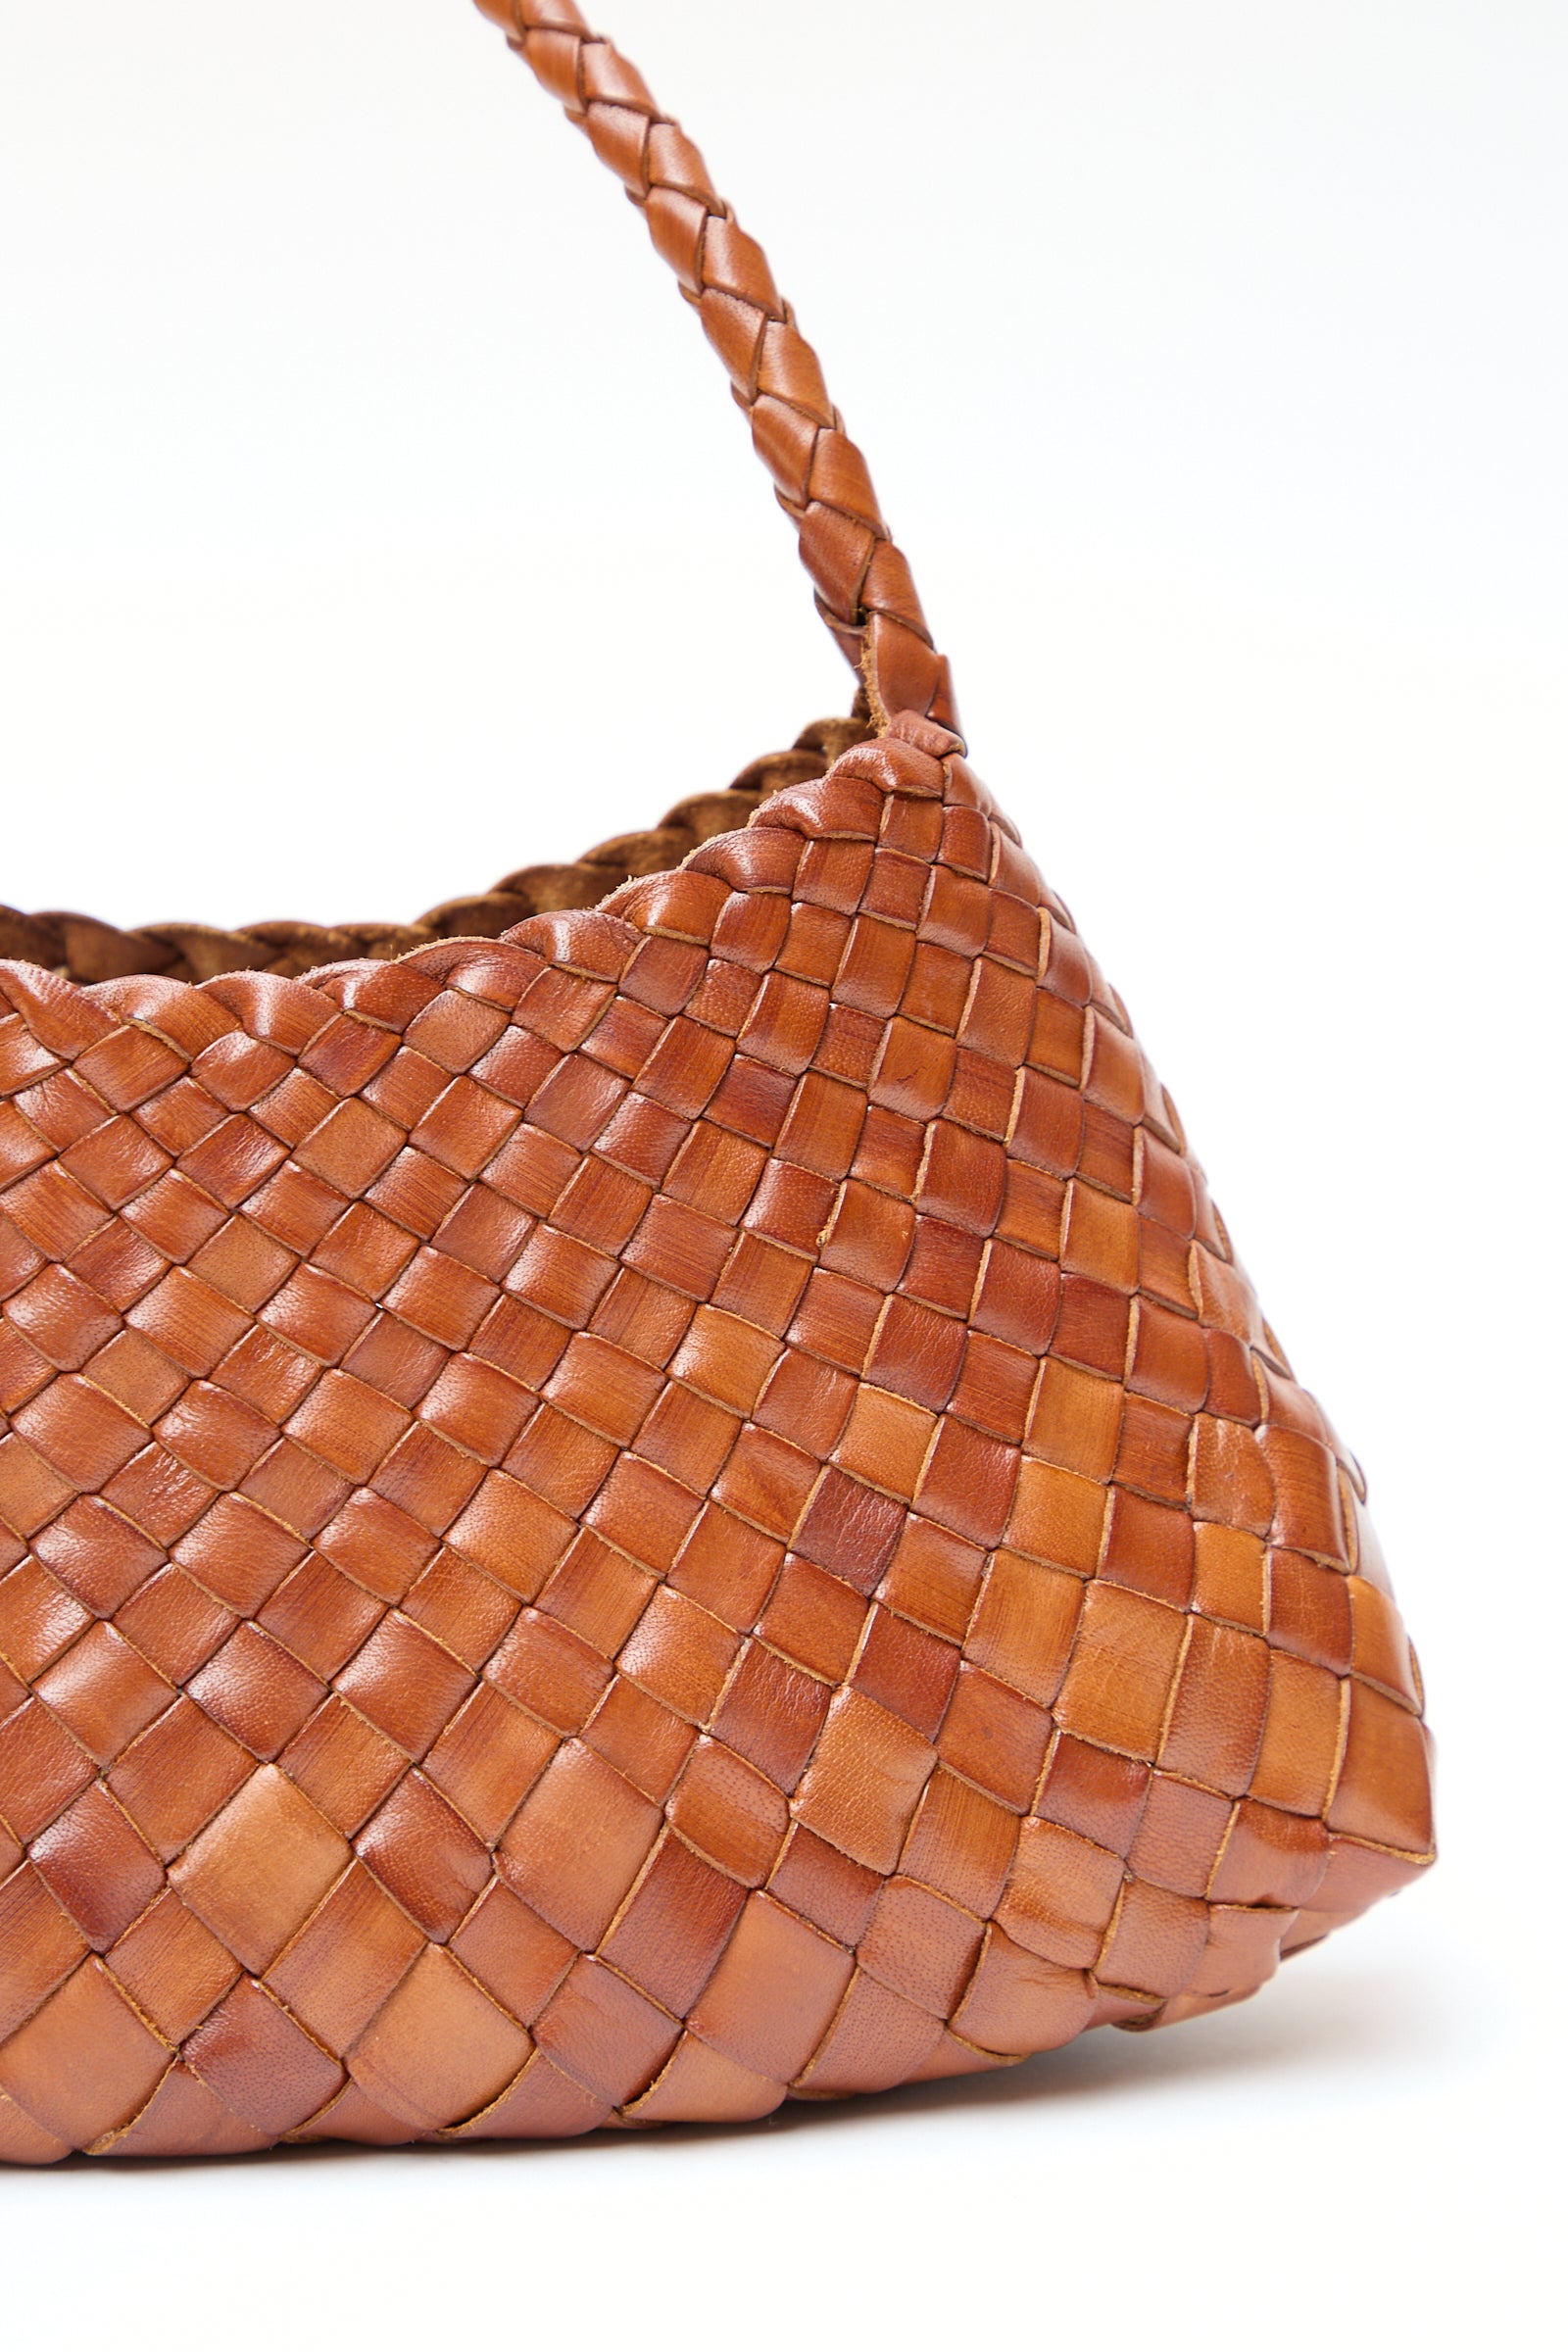 Close-up of a Rosanna in Tan woven buffalo leather handbag by Dragon Diffusion against a white background.